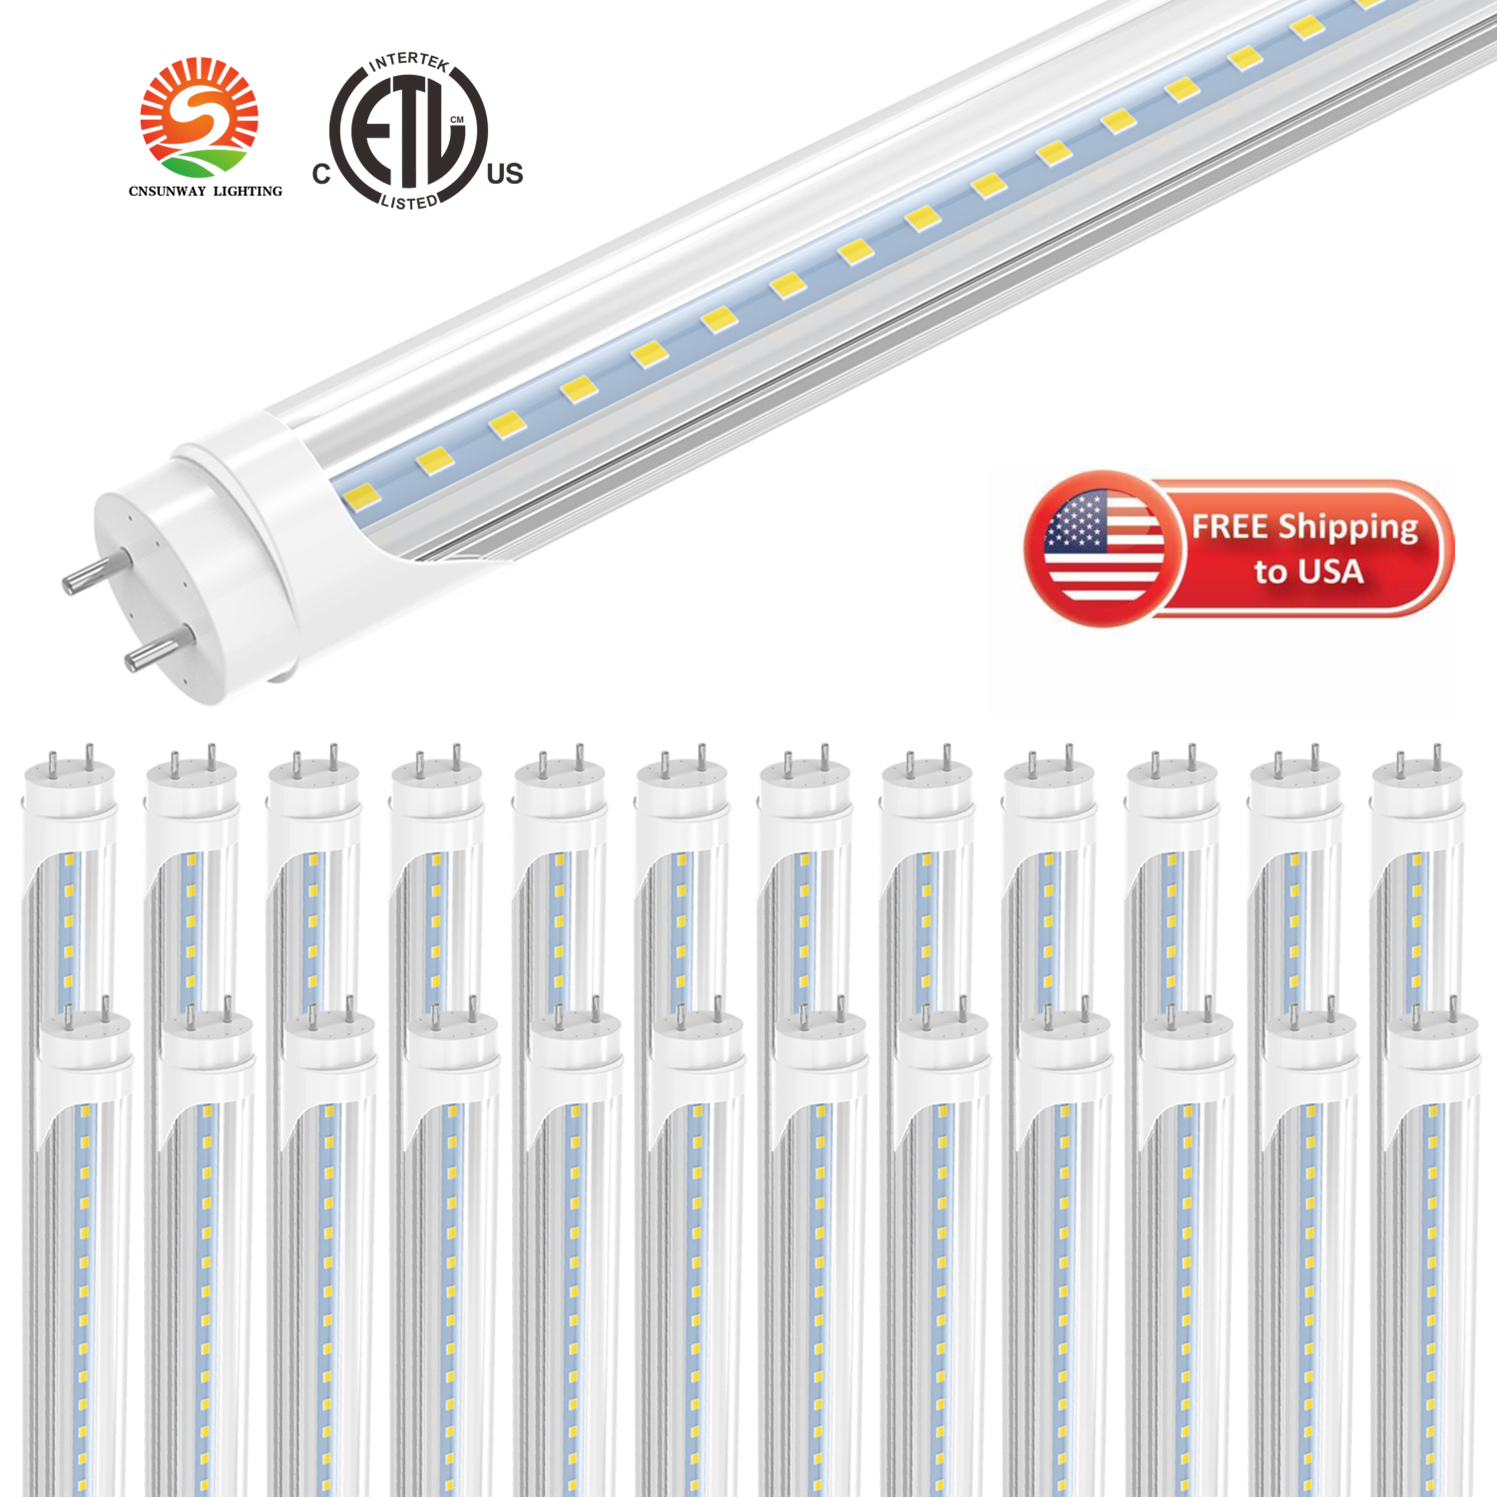 T8 LED Bulbs 4 Foot, 22W 2400LM, 6000K Cool White, Type B Light Tube, Double Ended Power, Ballast Bypass, Clear Cover, T8 T10 T12 Fluorescent Light Bulbs Replacement ETL